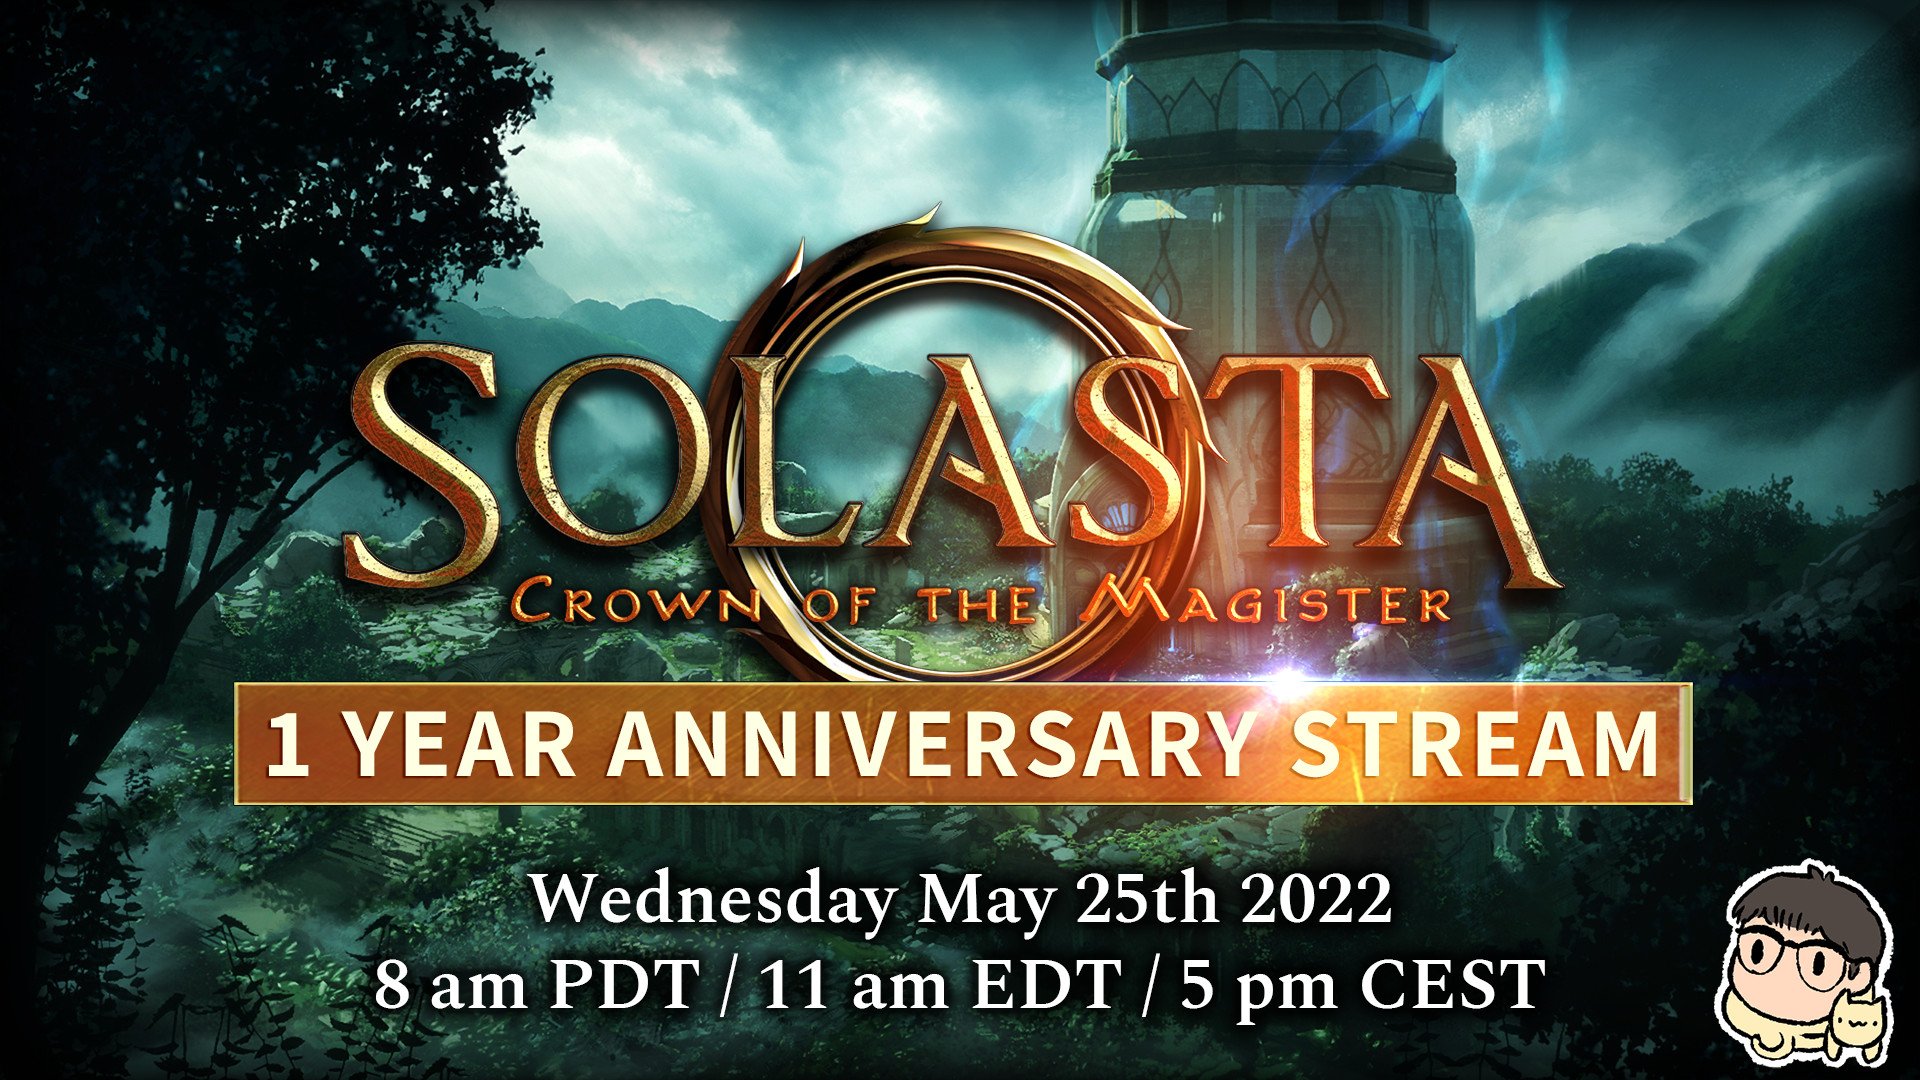 Solasta 1 Year Anniversary Stream + Giveaways - May 25th